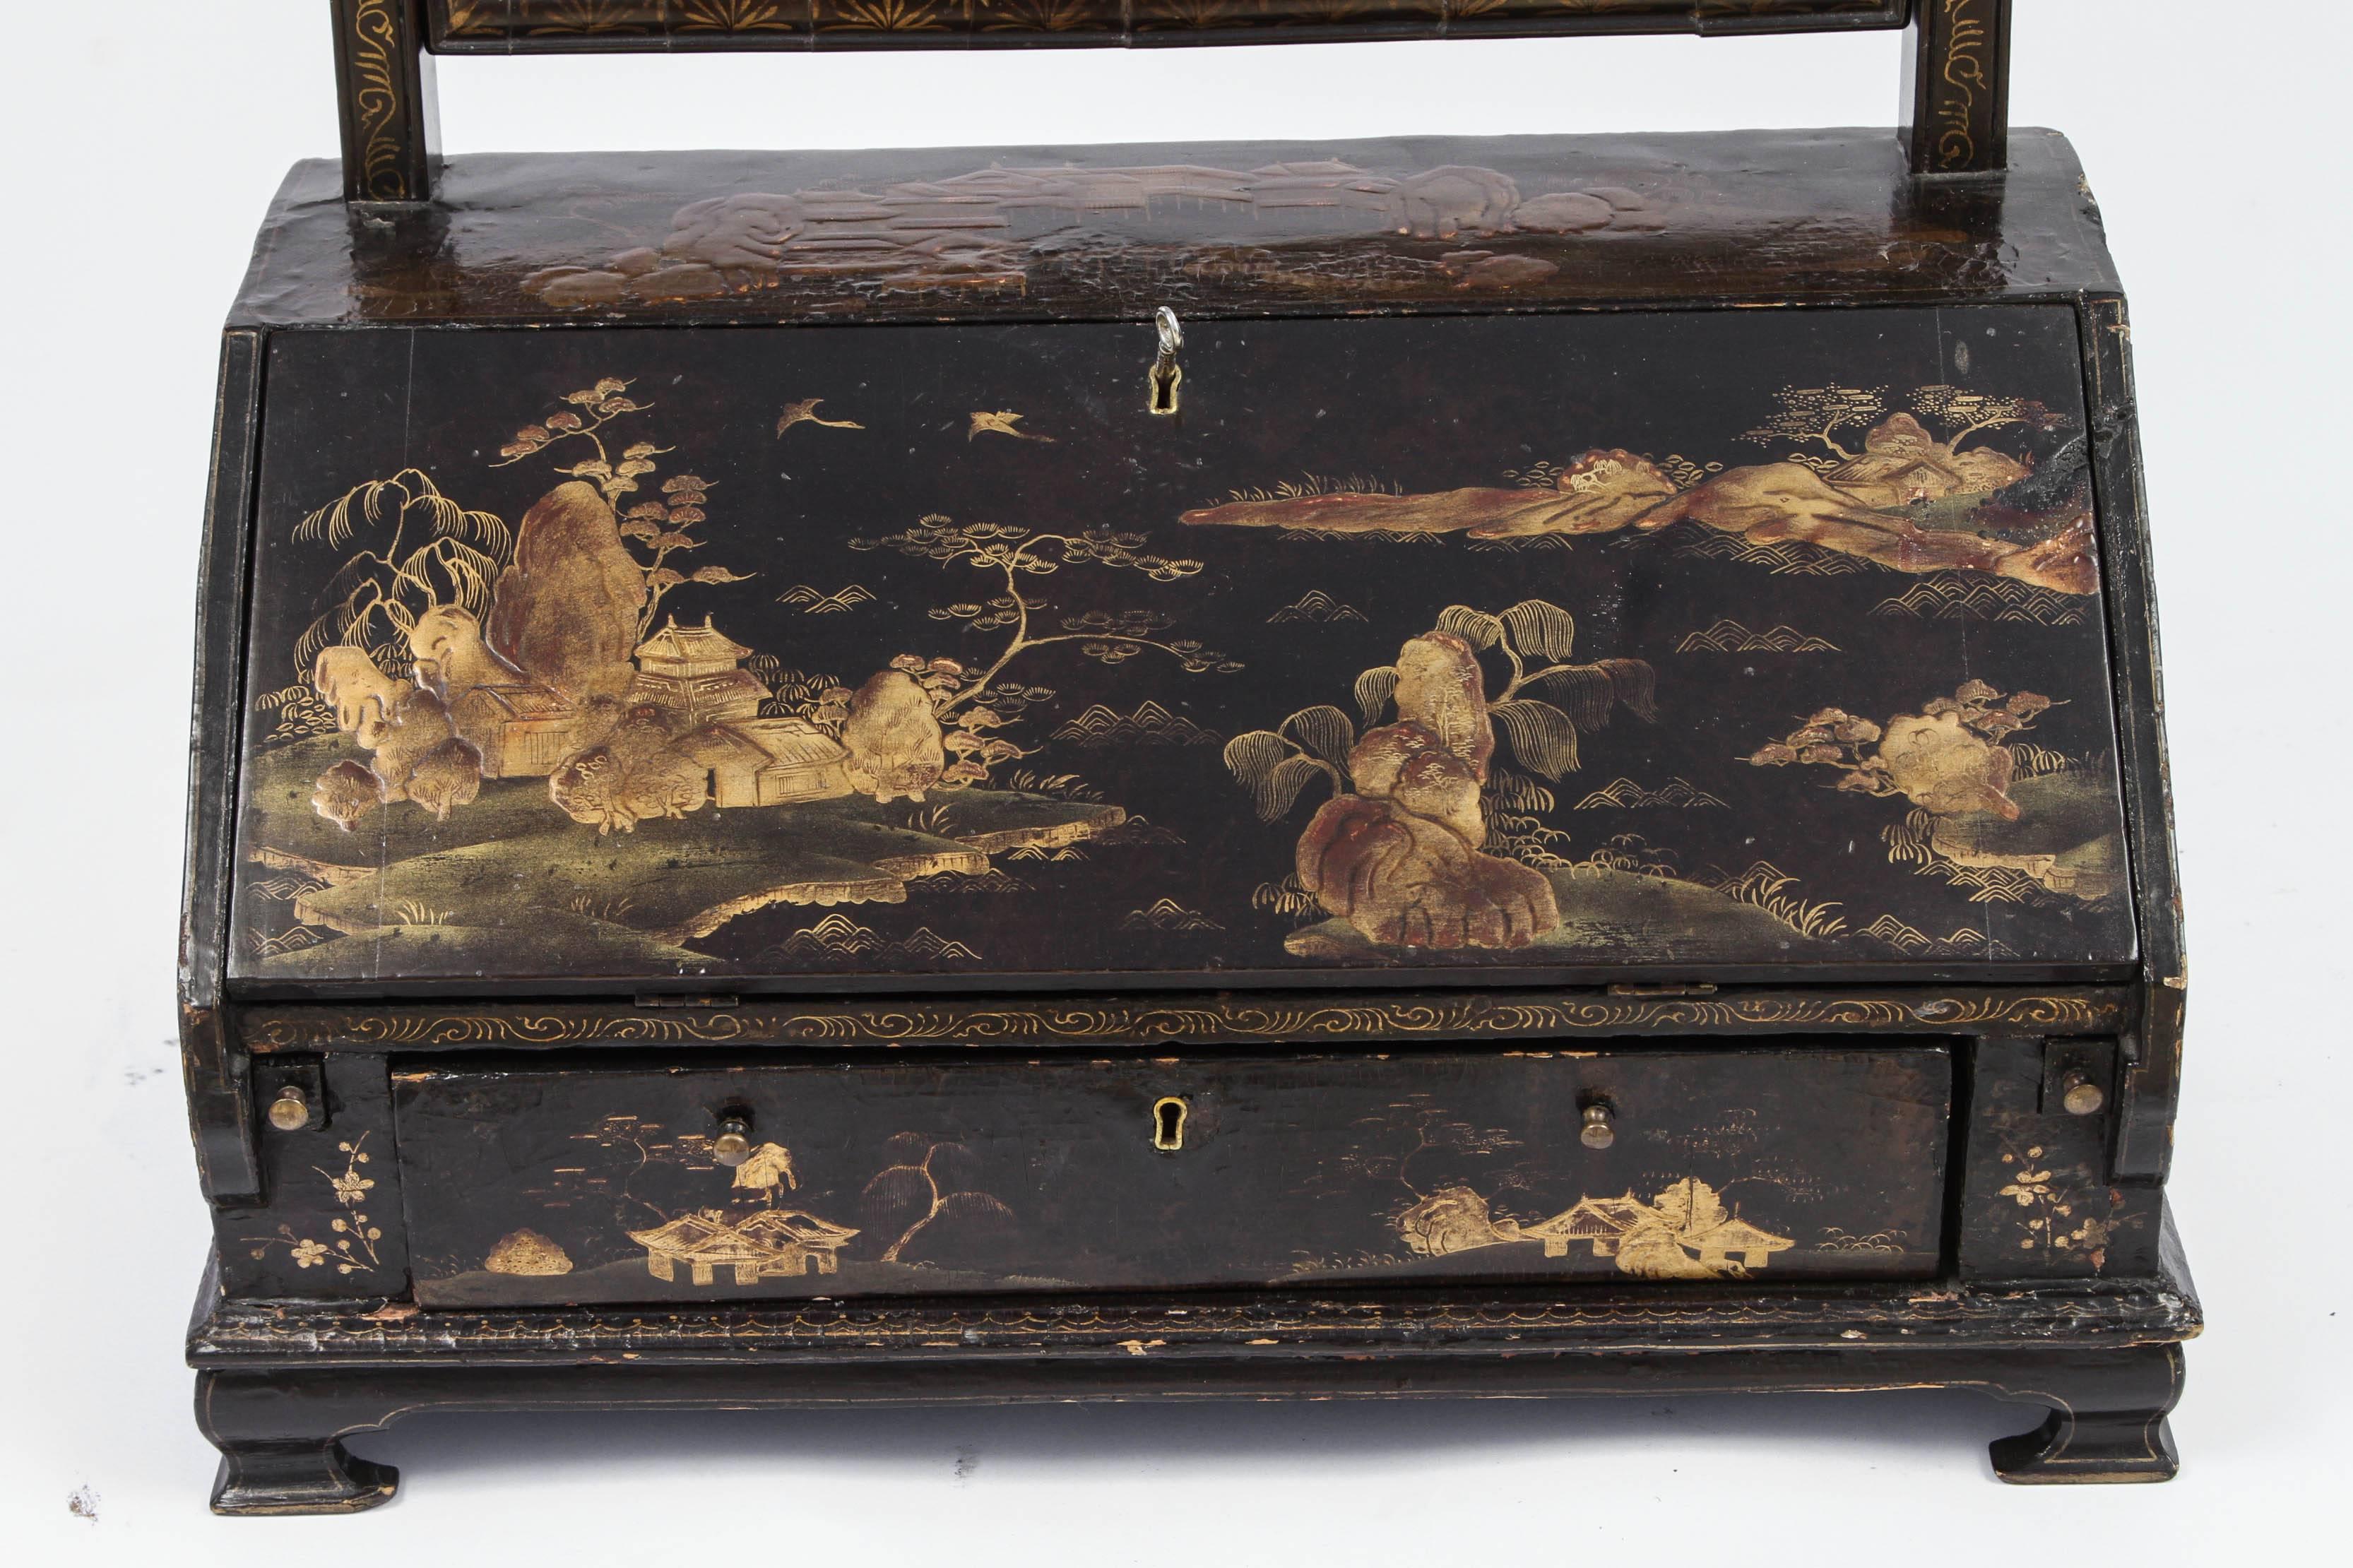 Hand-Painted 19th Century English Chinoiserie Miniature Desk with Mirror